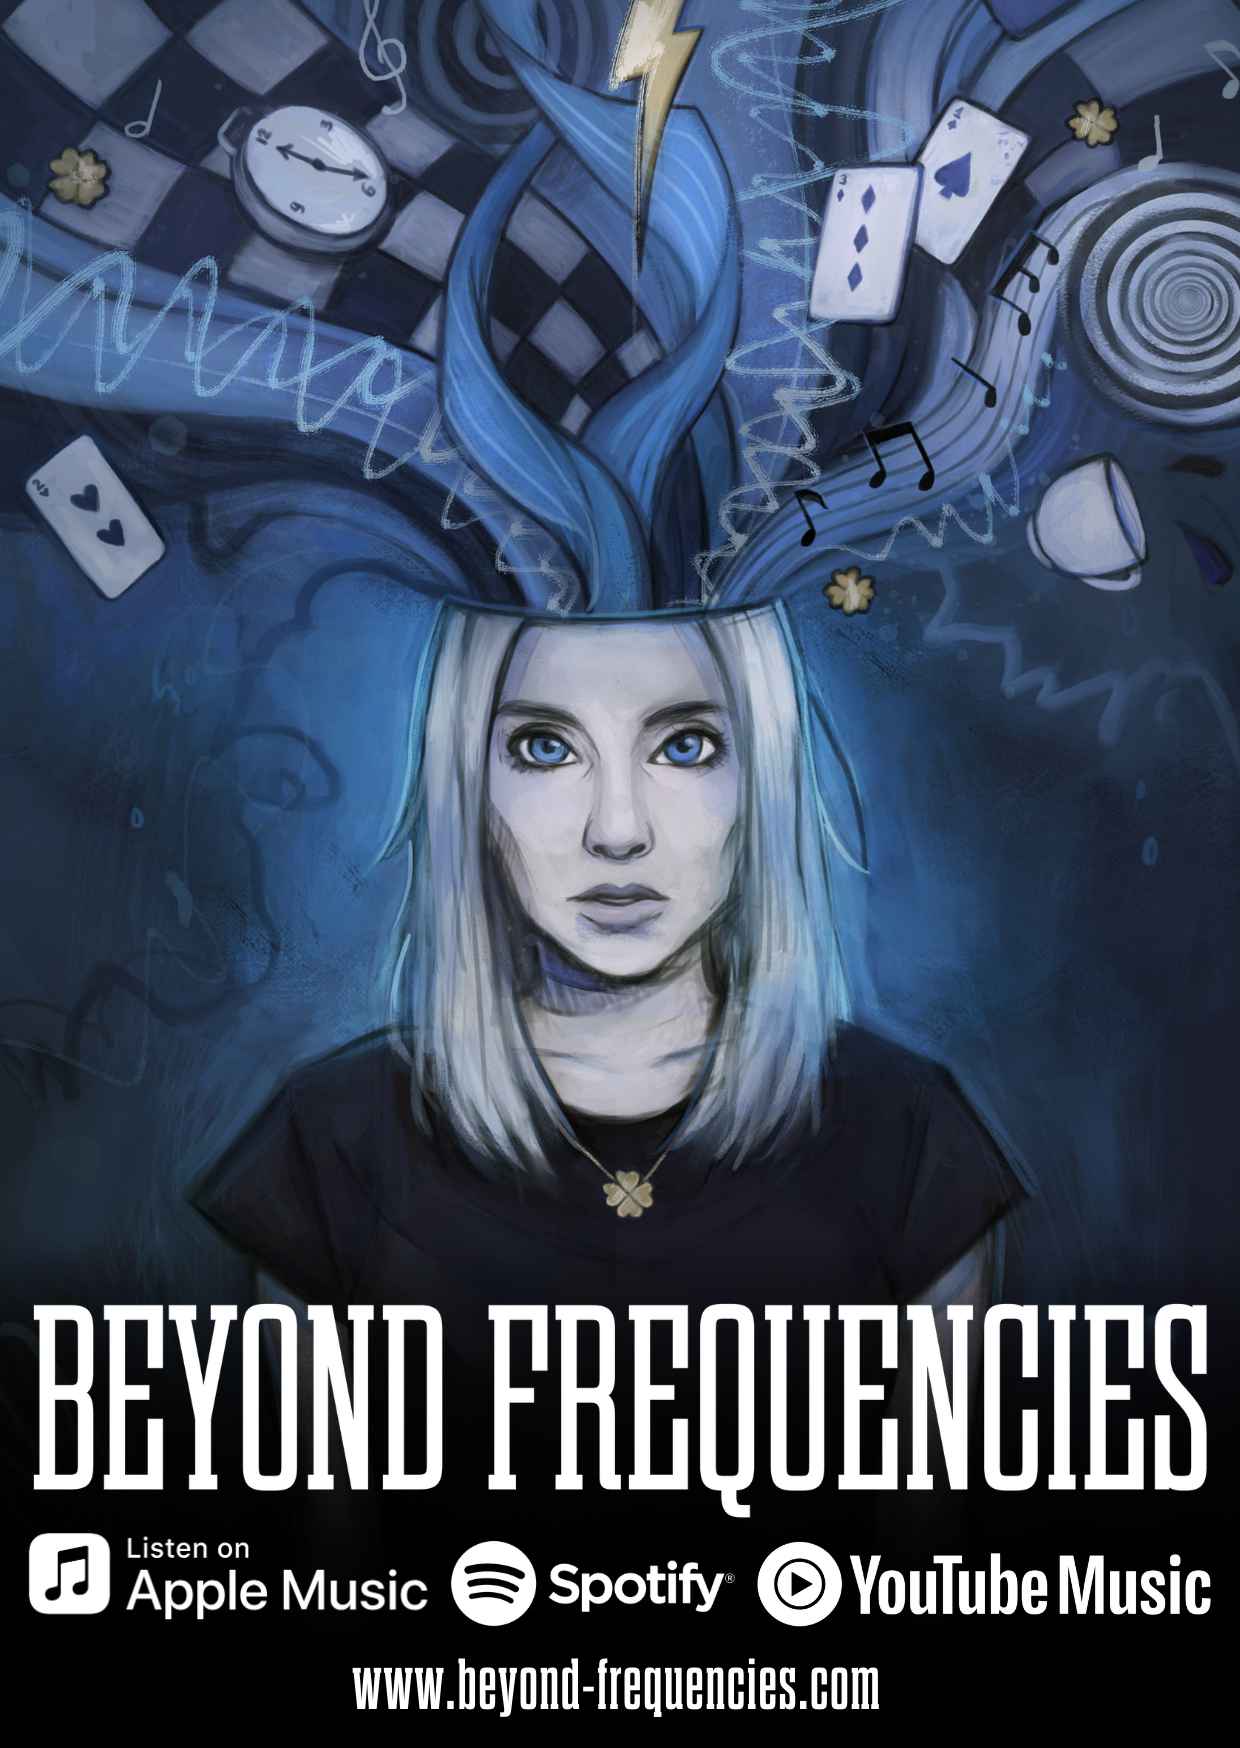 Autograph Card - Beyond Frequencies